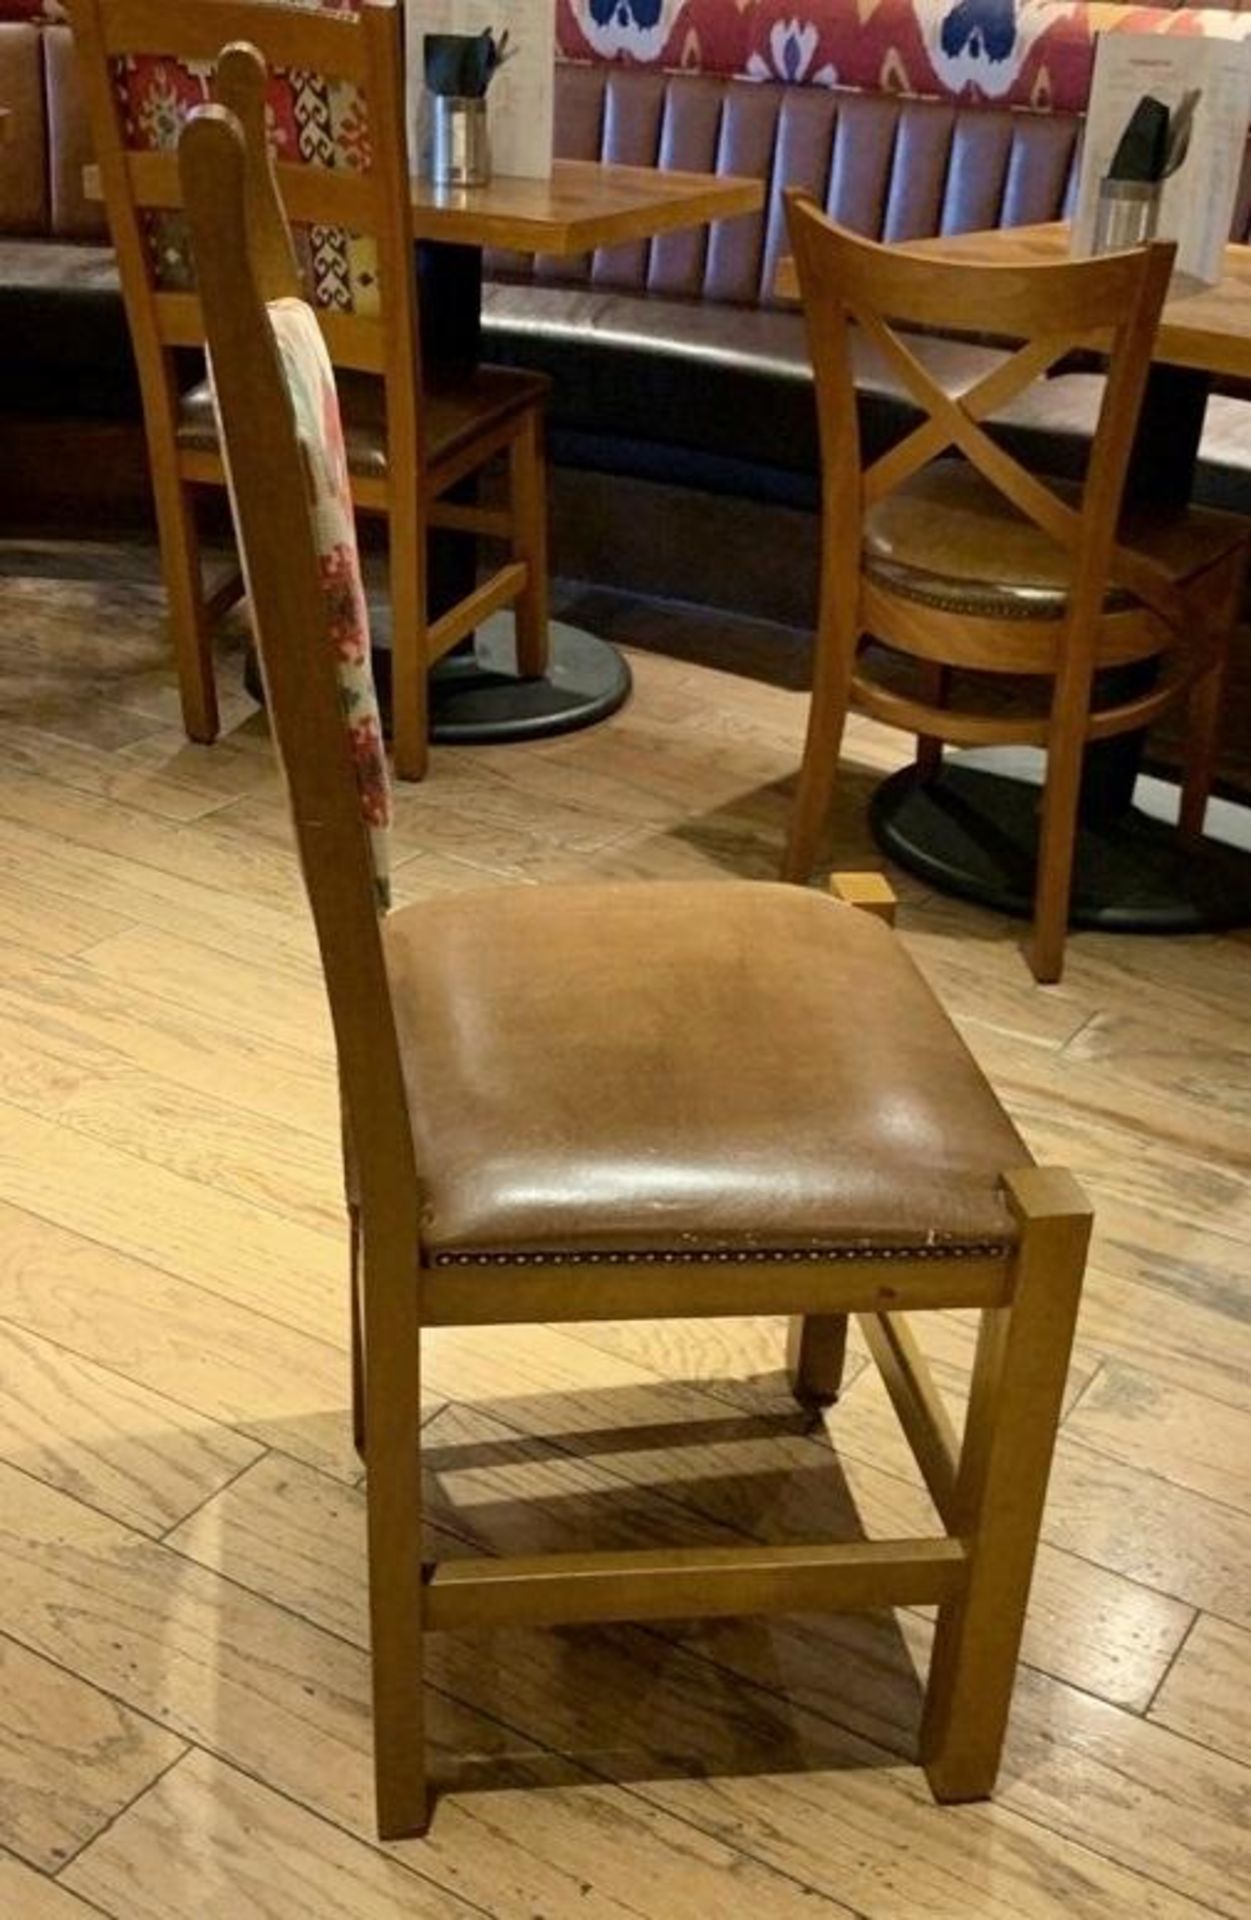 4 x Mid Height Upholstered Wooden Dining Chair - Dimensions: H100cm W46cm - CL339 - From a Popular M - Image 2 of 3